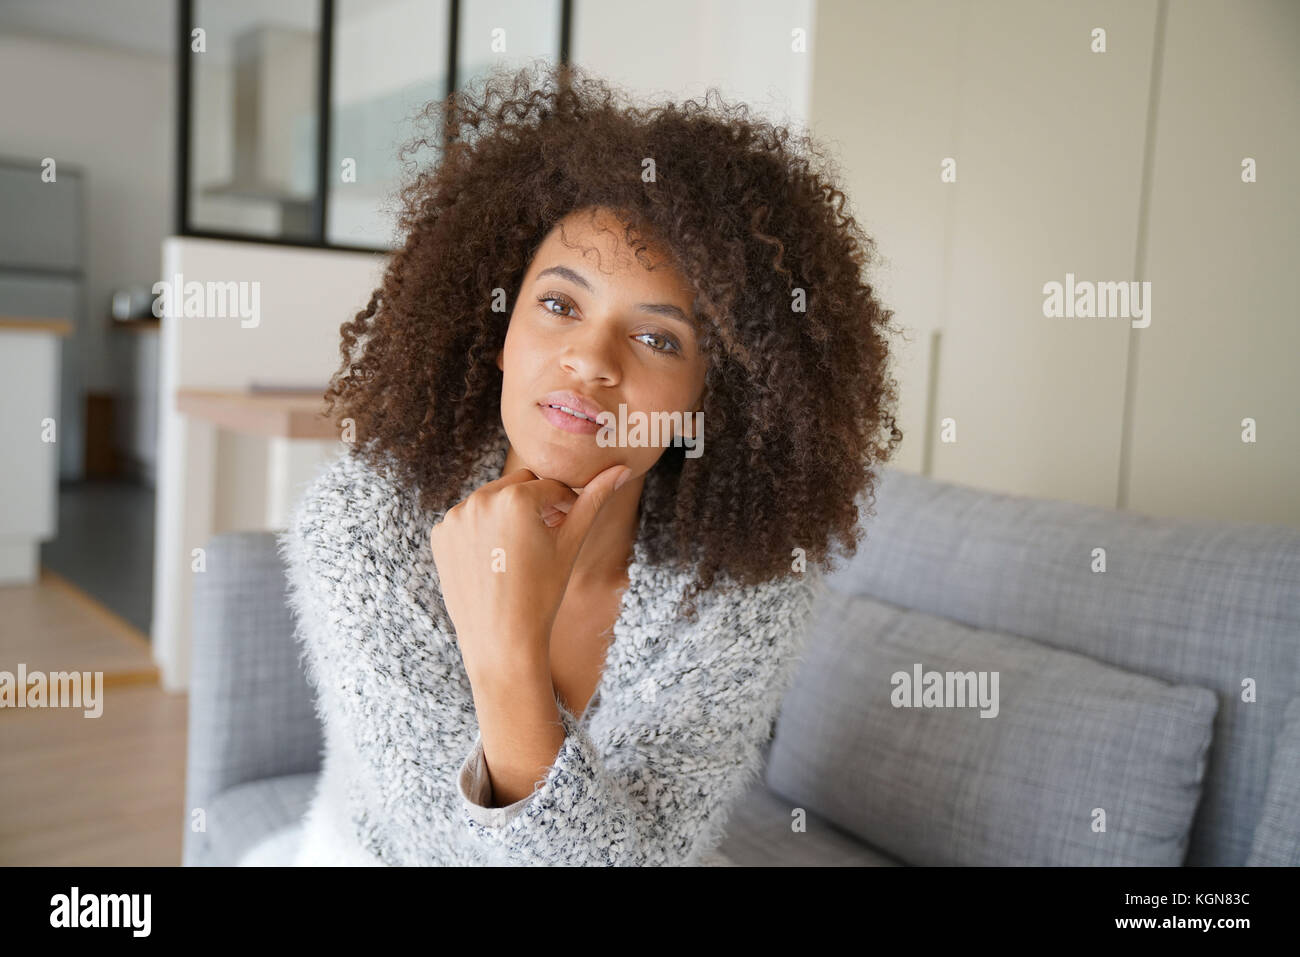 Attractive mixed-race woman relaxing on sofa Stock Photo